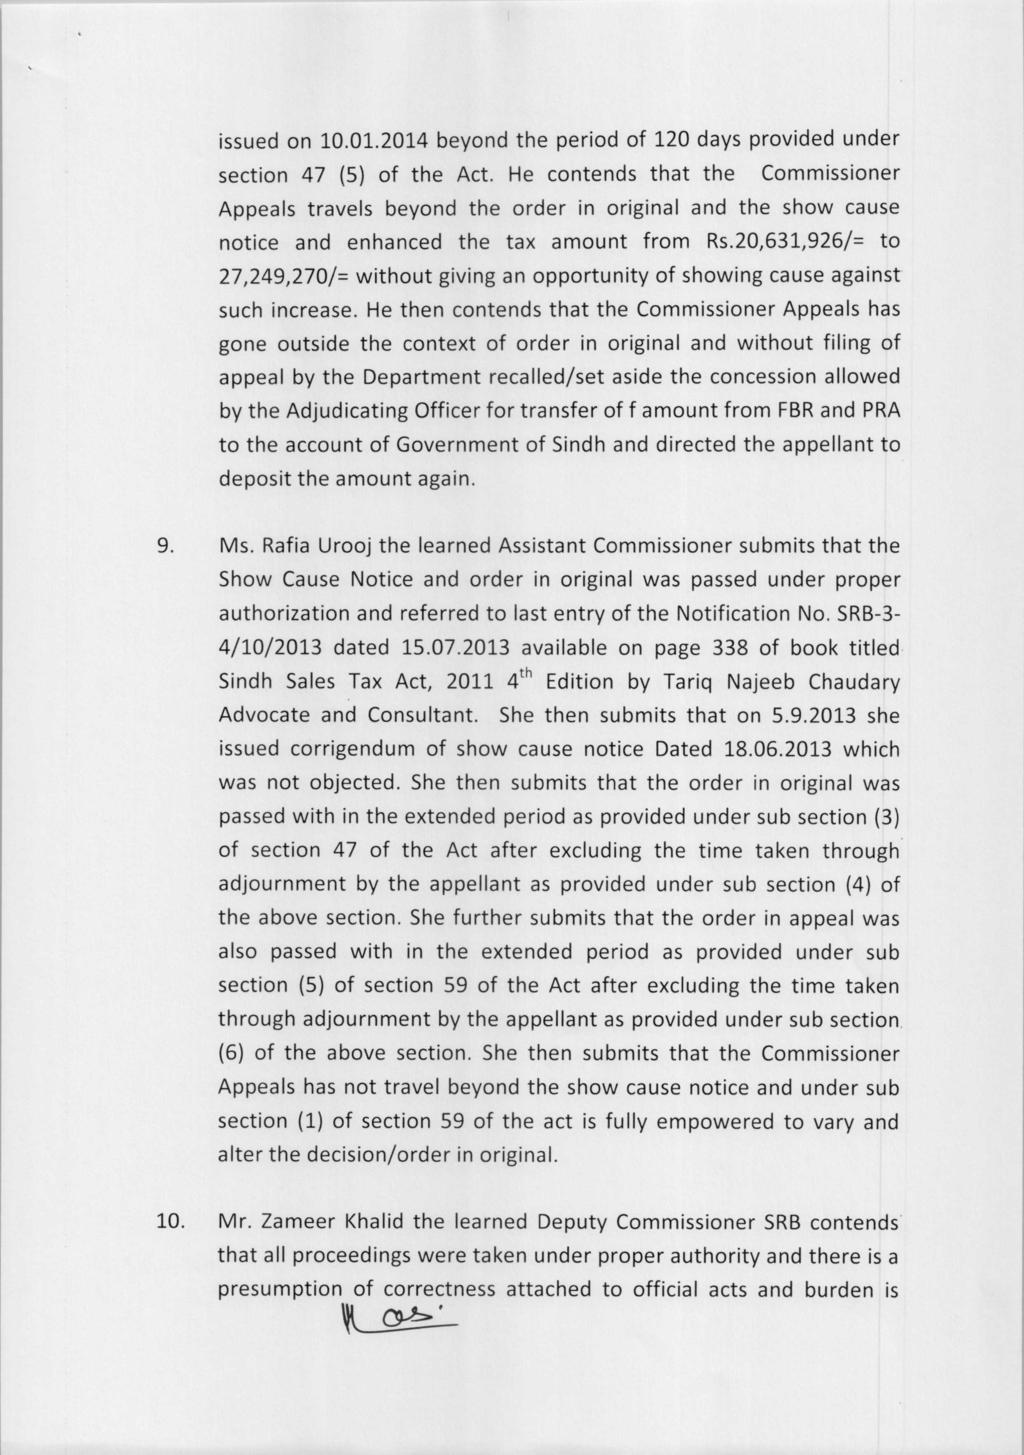 issued on 10.01.2014 beyond the period of 120 days provided under section 47 (5) of the Act.